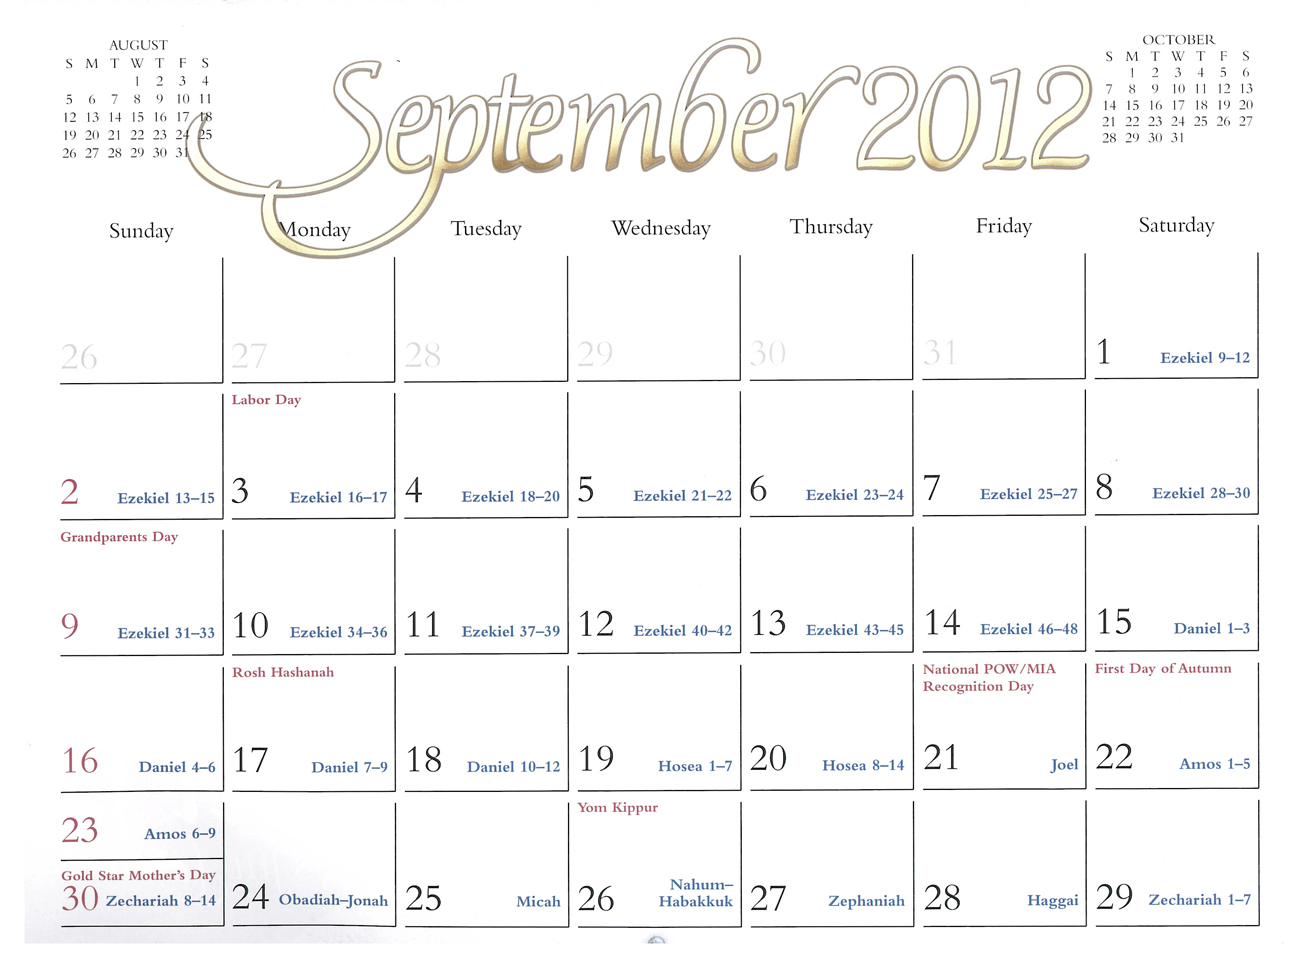 2012 Prophecy Calendar: September - Paul's Second Letter to the Church at Thessalonica